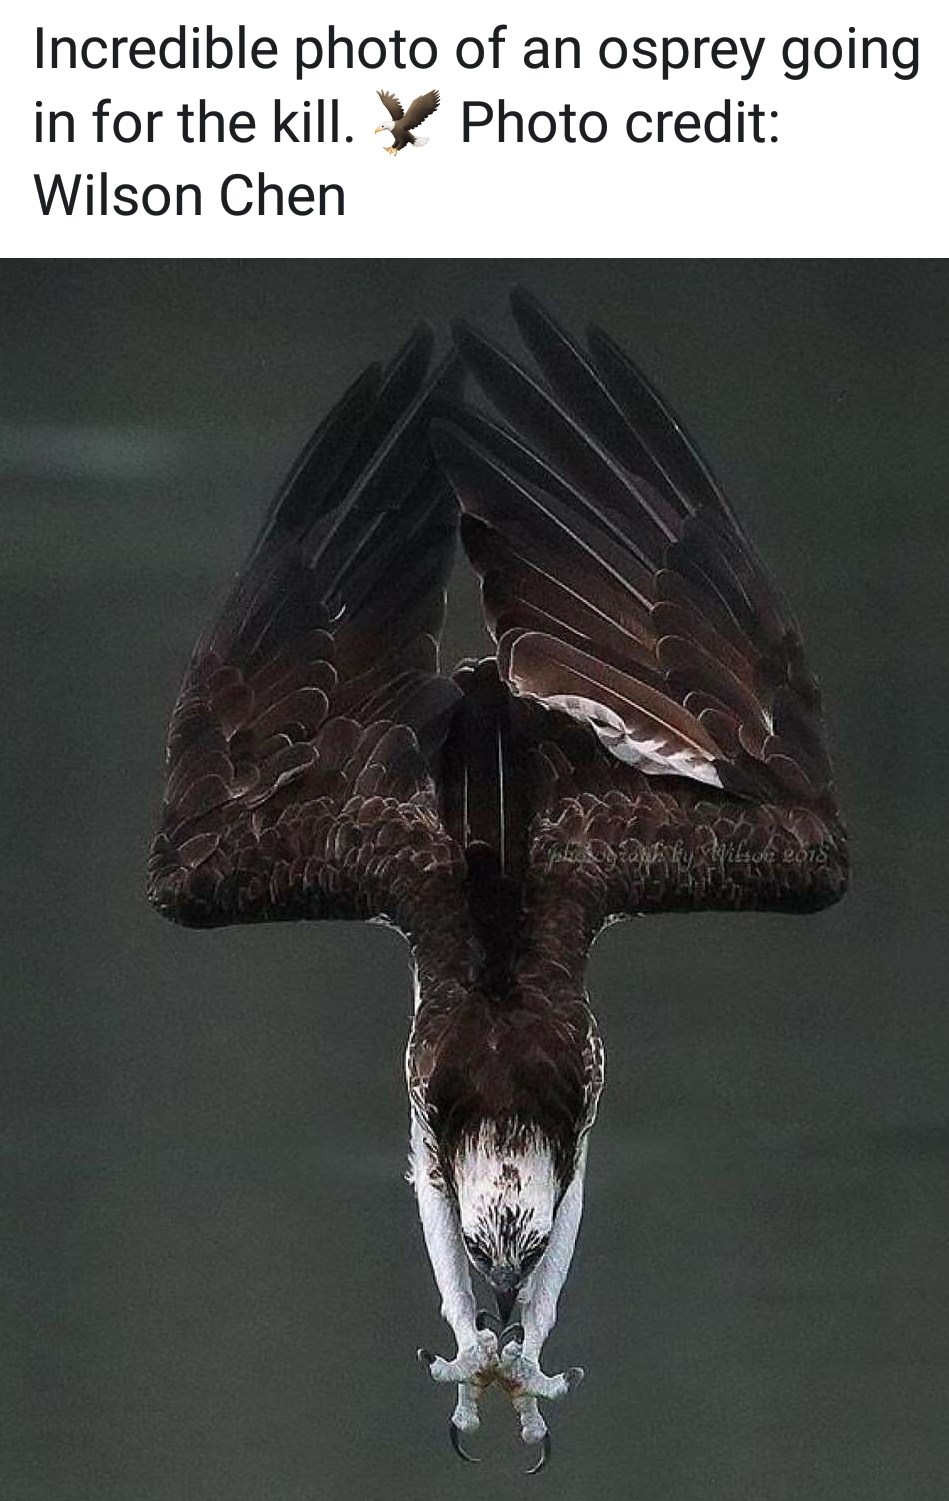 osprey diving - Incredible photo of an osprey going in for the kill. y Photo credit Wilson Chen